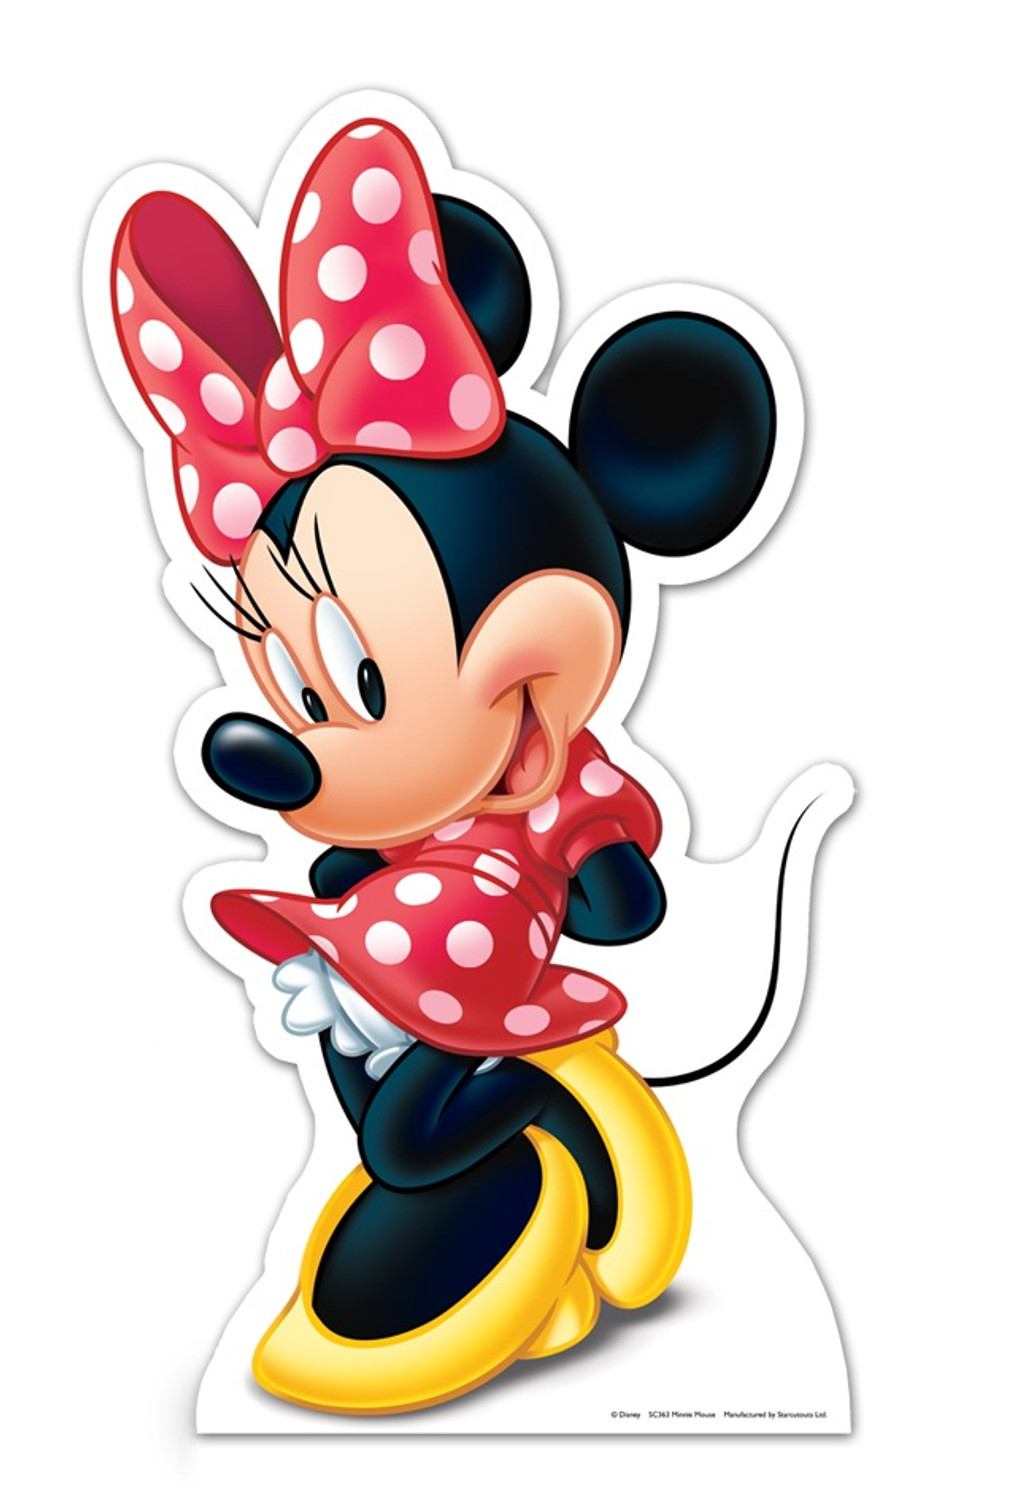 Lifesize Cardboard Cutout of Minnie Mouse buy Disney character cutouts &  standees at starstills.com